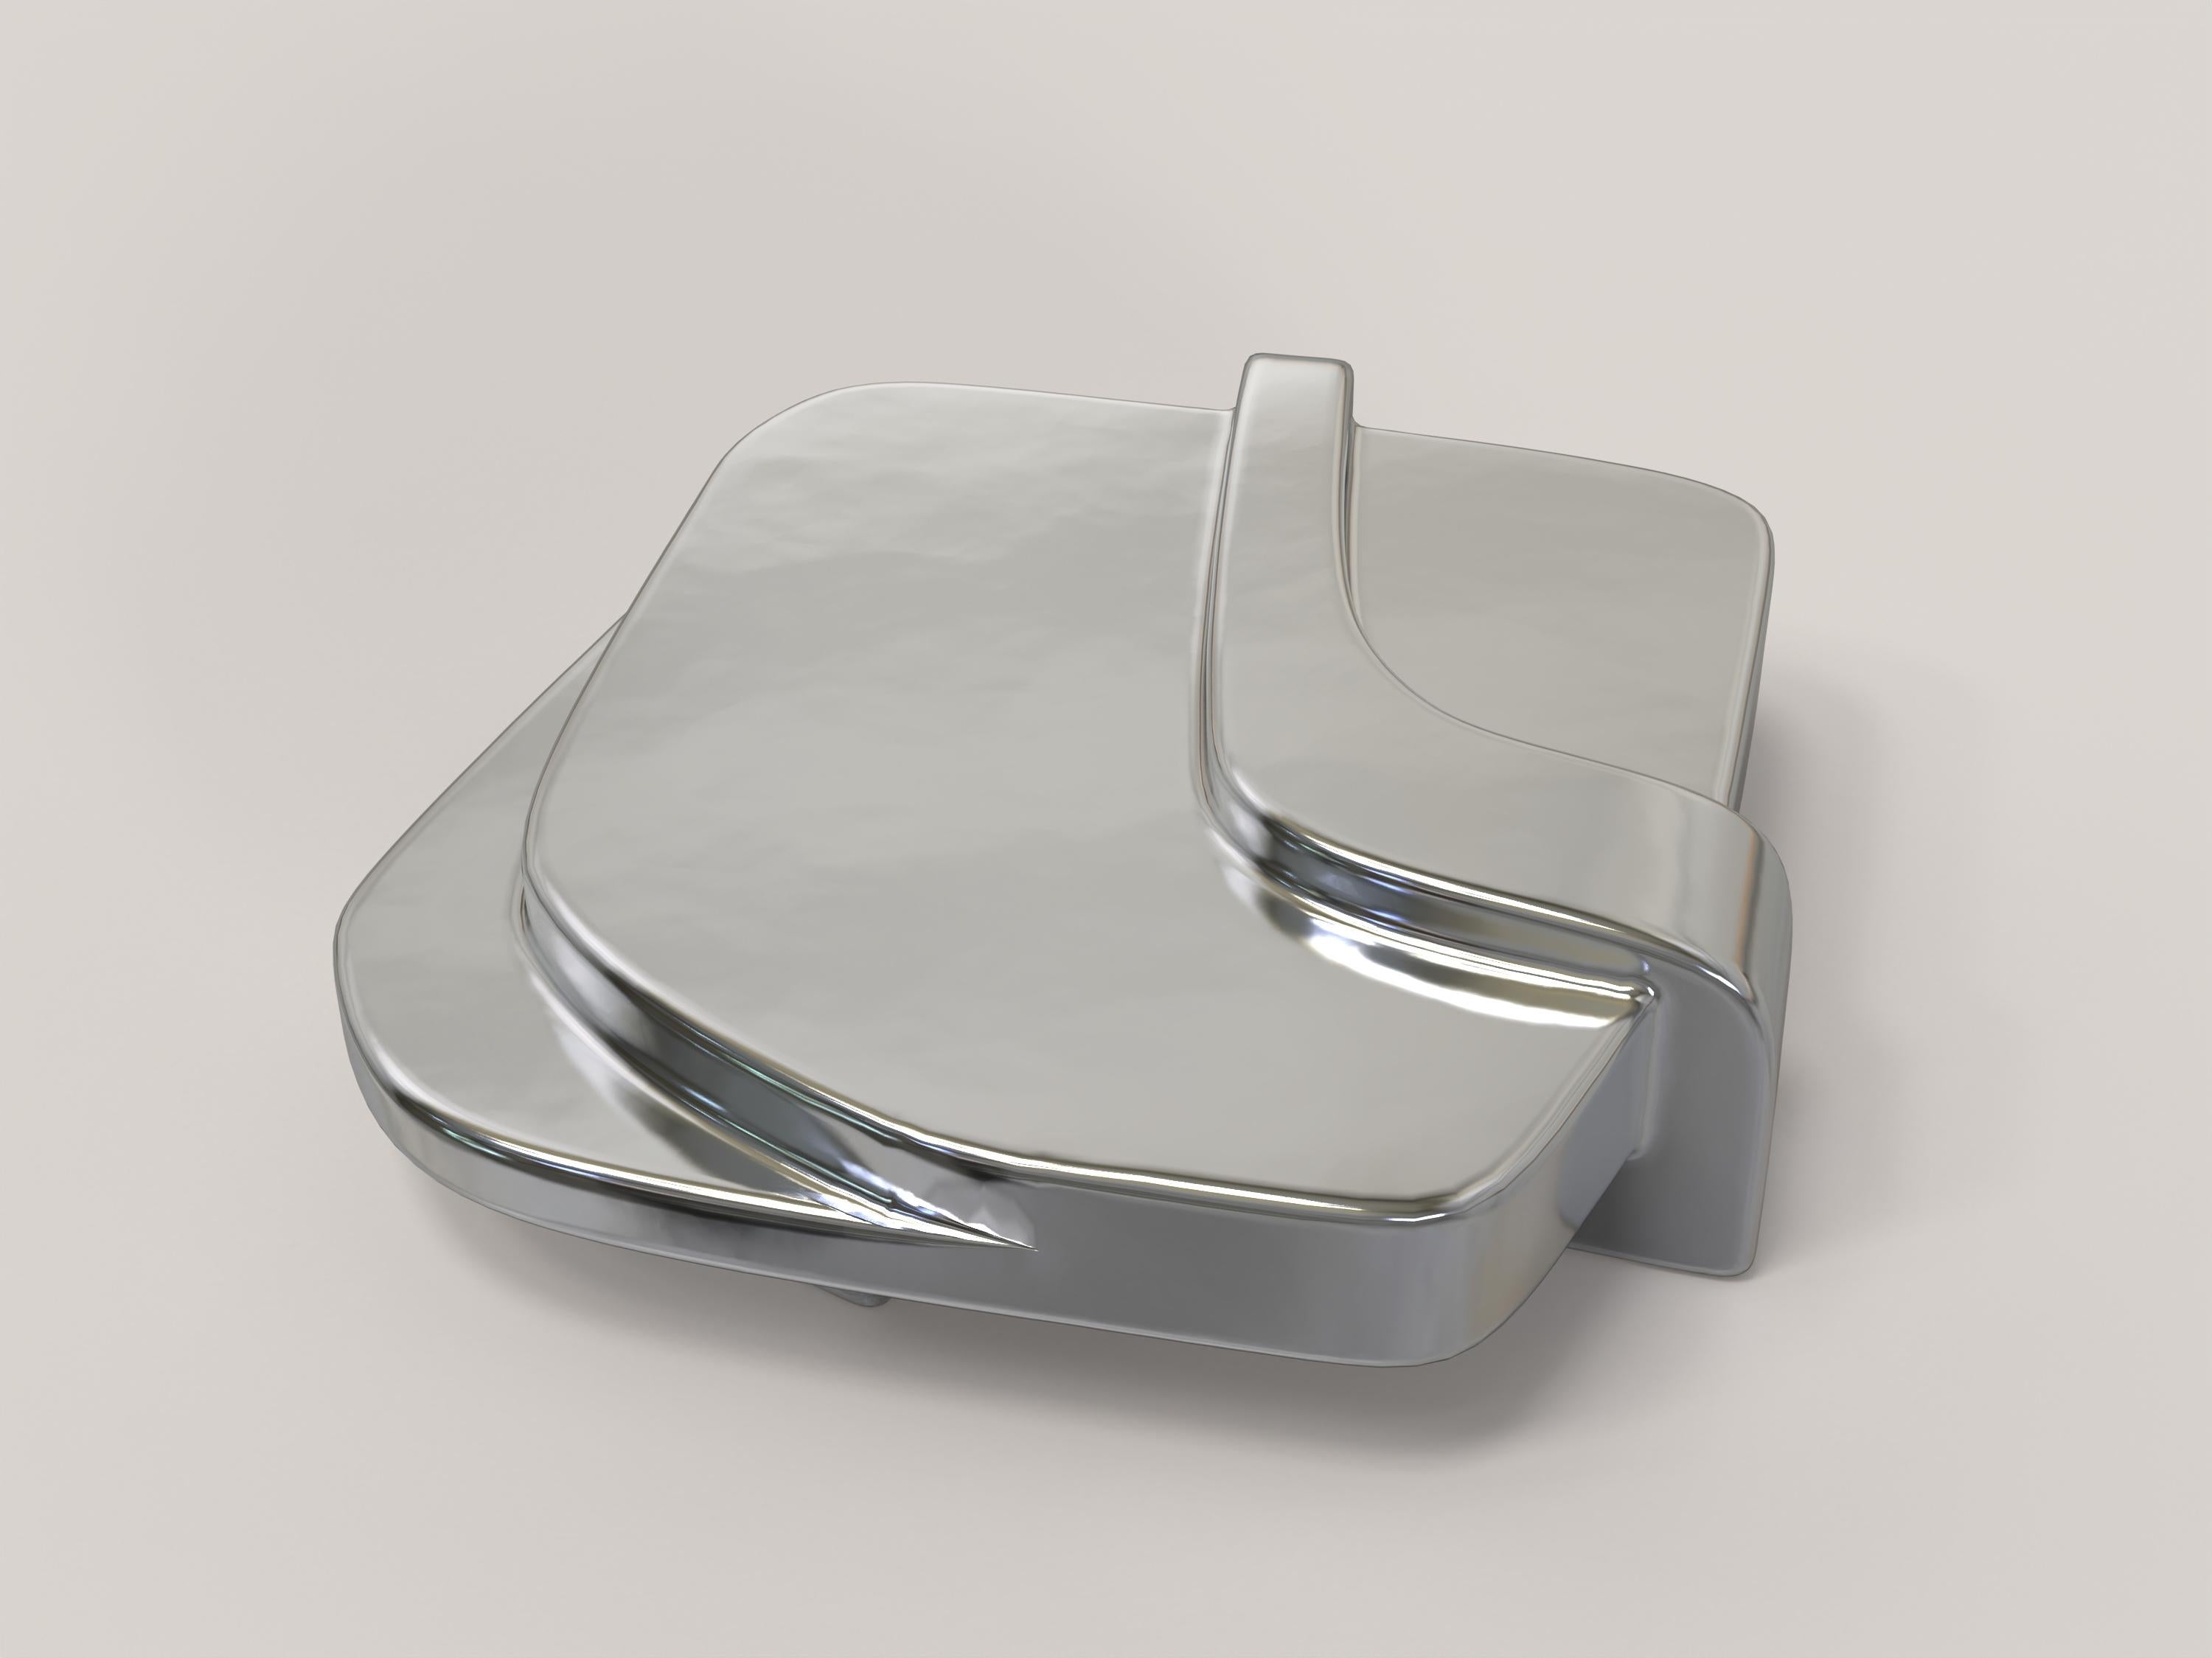 Painted Contemporary Limited Edition Chromed Low Table, Rodi V2 by Edizione Limitata For Sale